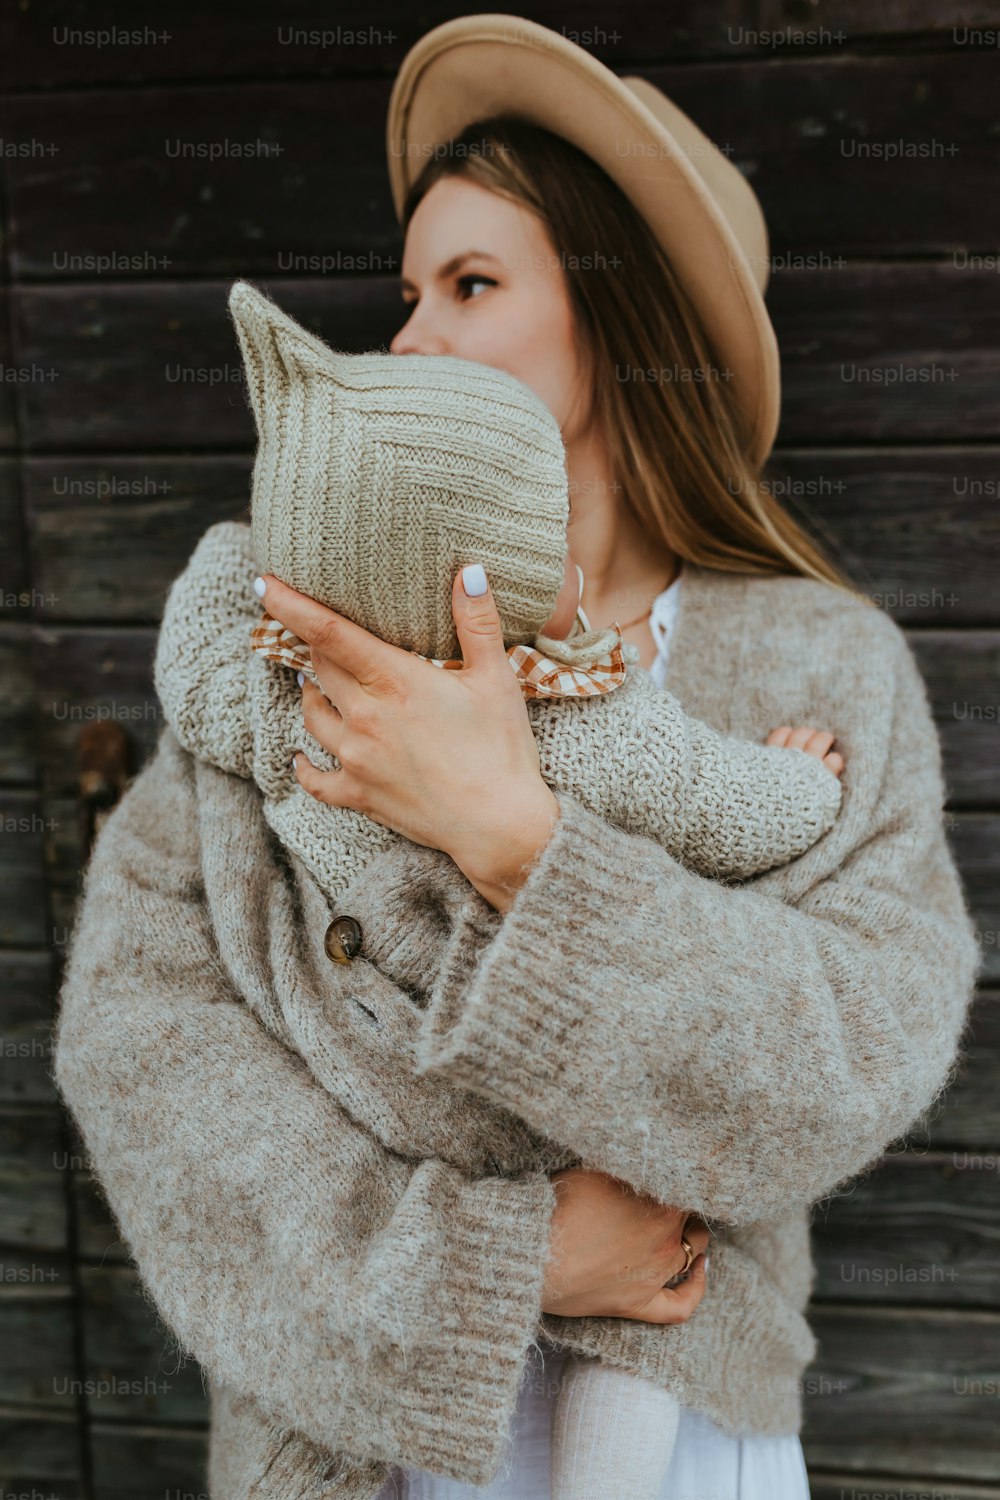 a woman in a hat and sweater holding a cat pillow